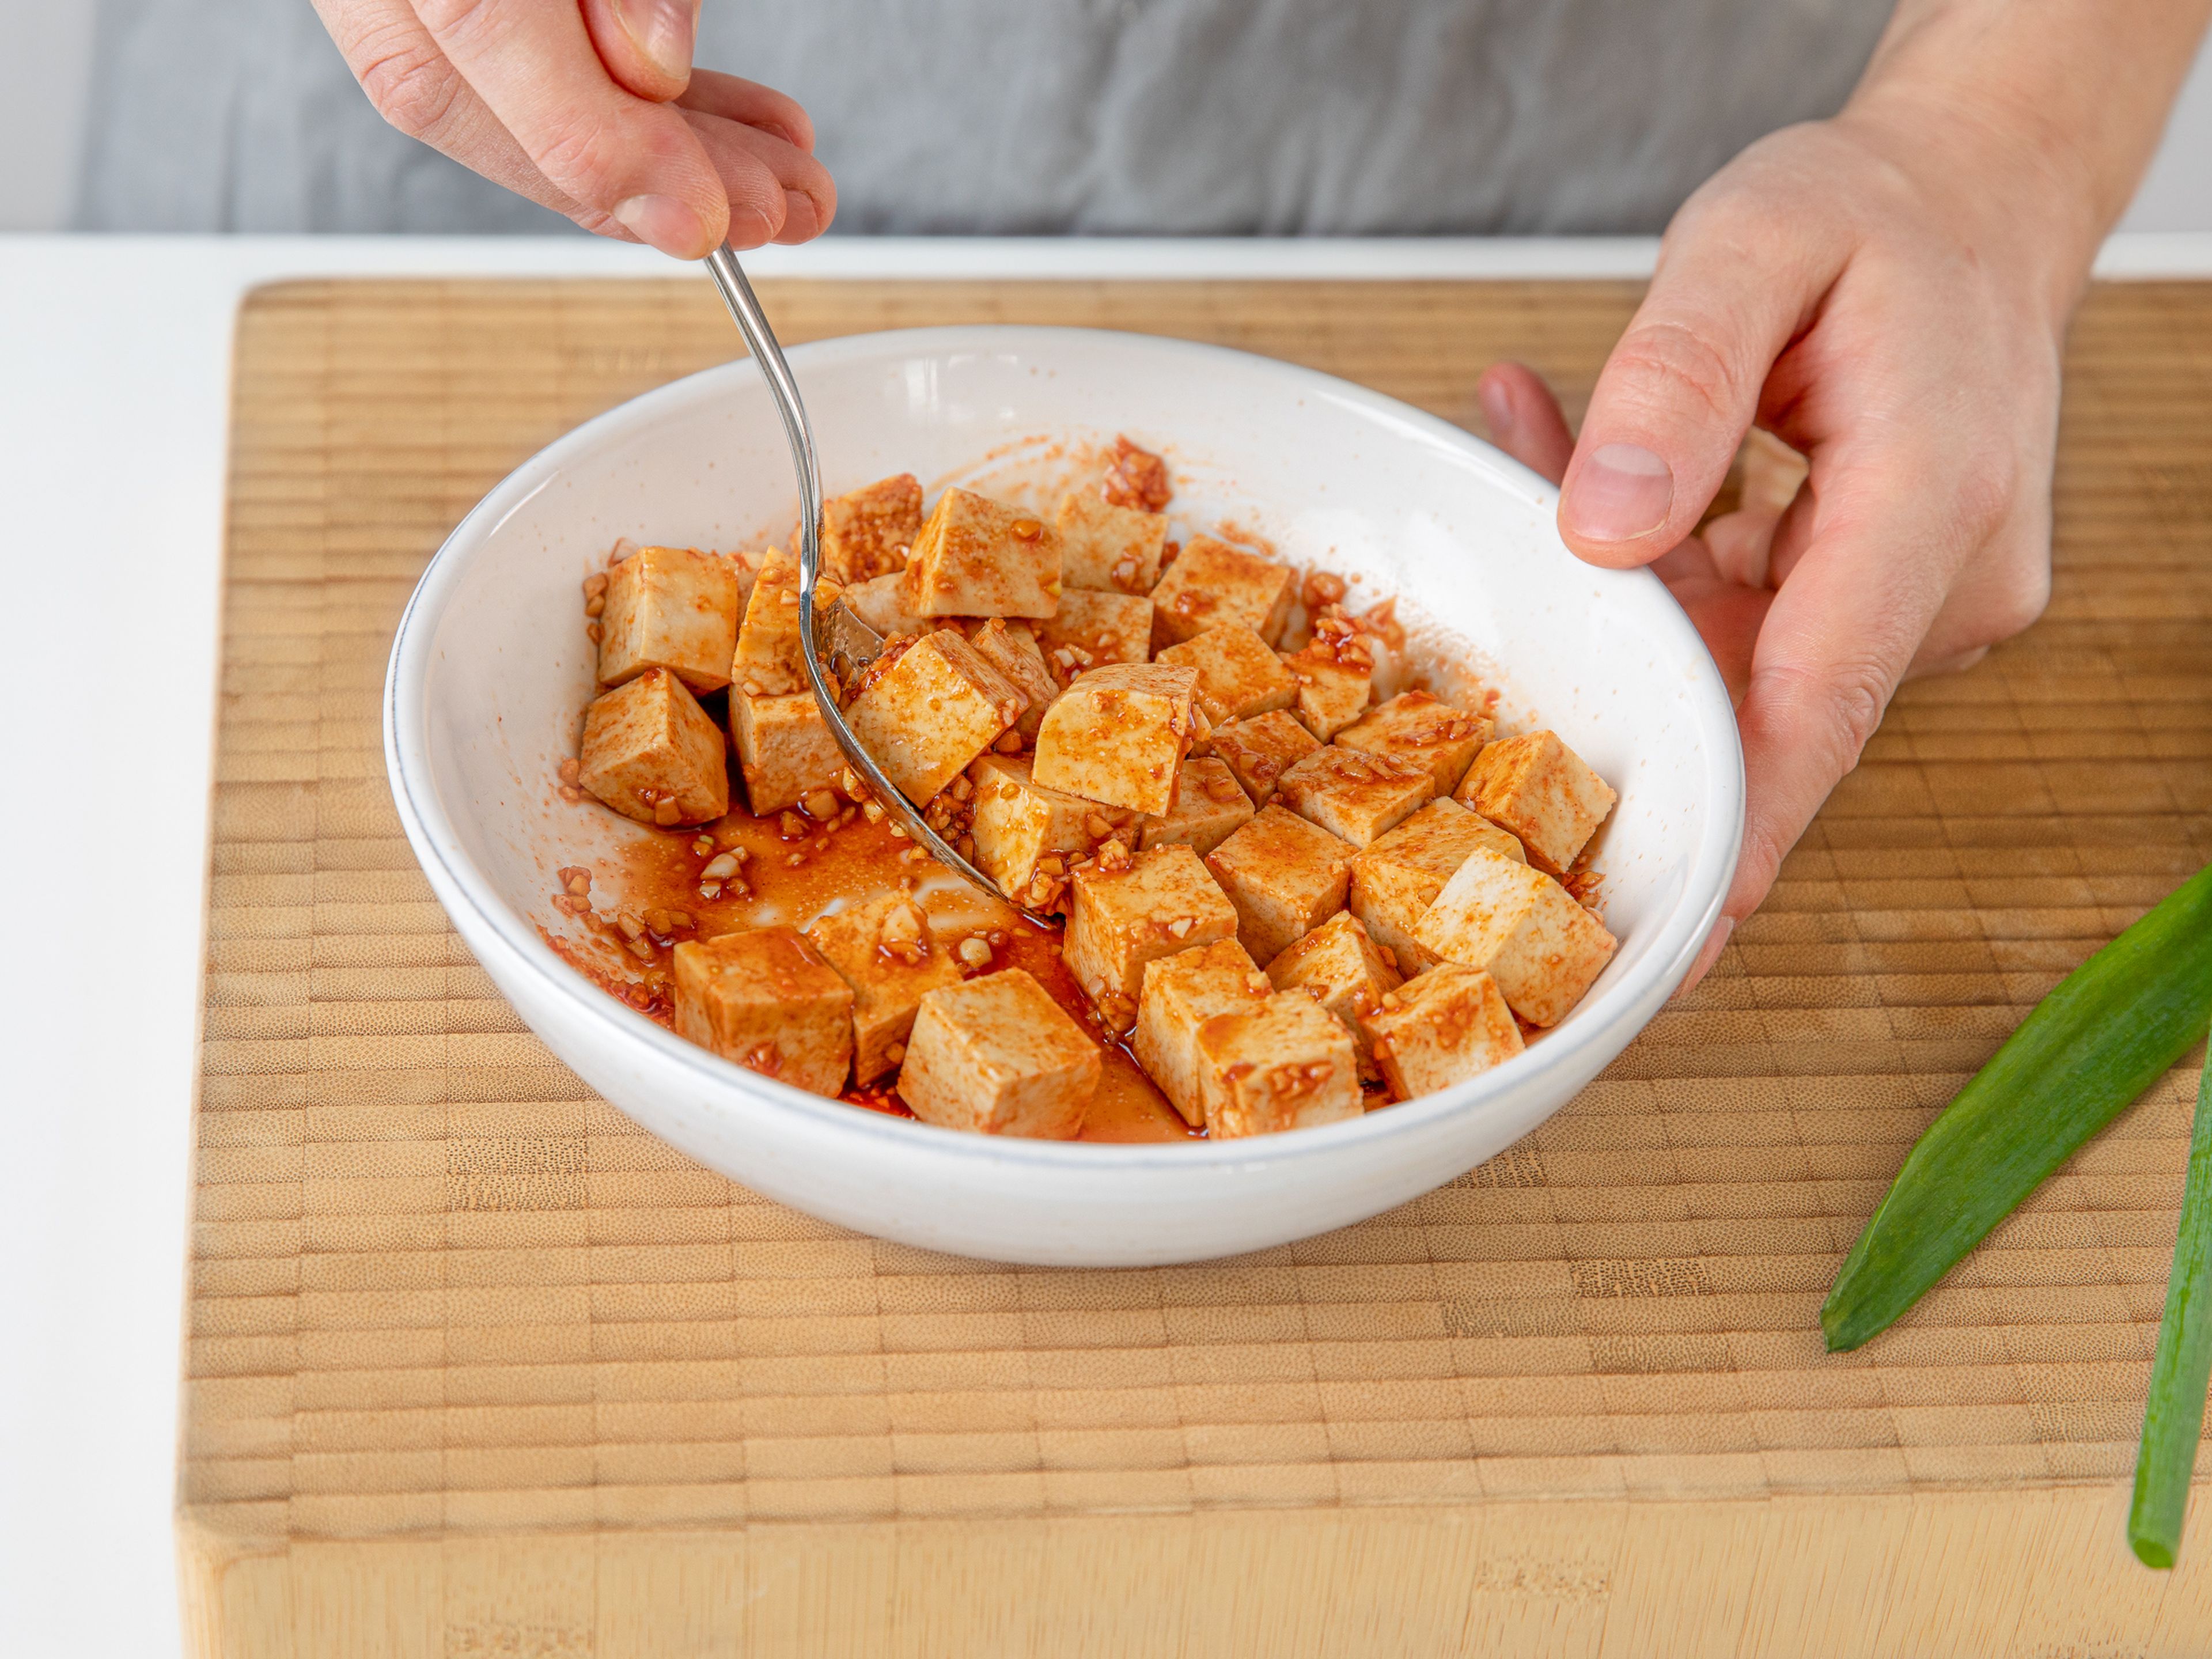 To make the tofu marinade: peel garlic and ginger and finely chop both. Combine soy sauce, gochujang, garlic, ginger, and half of the sugar in a bowl. Cut tofu into bite-sized cubes and add to the marinade, and mix well. Let it marinate for approx. 10 min.